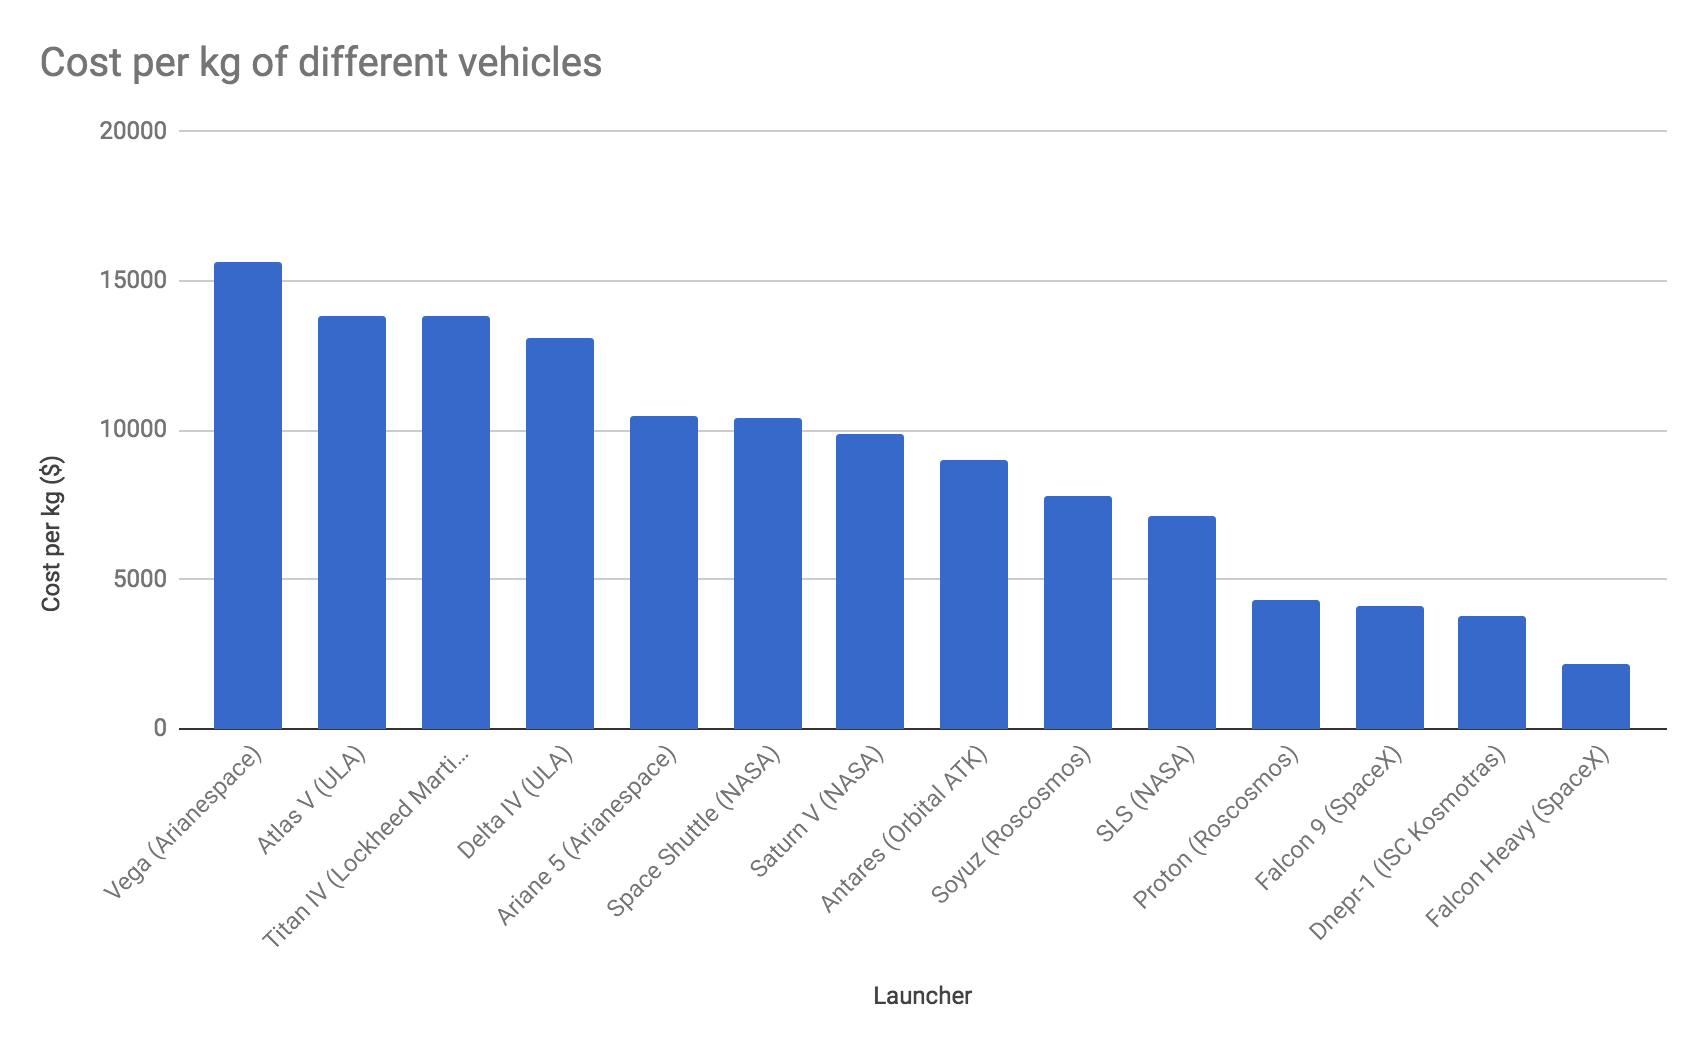 Cost per kg of different vehicles bar chart